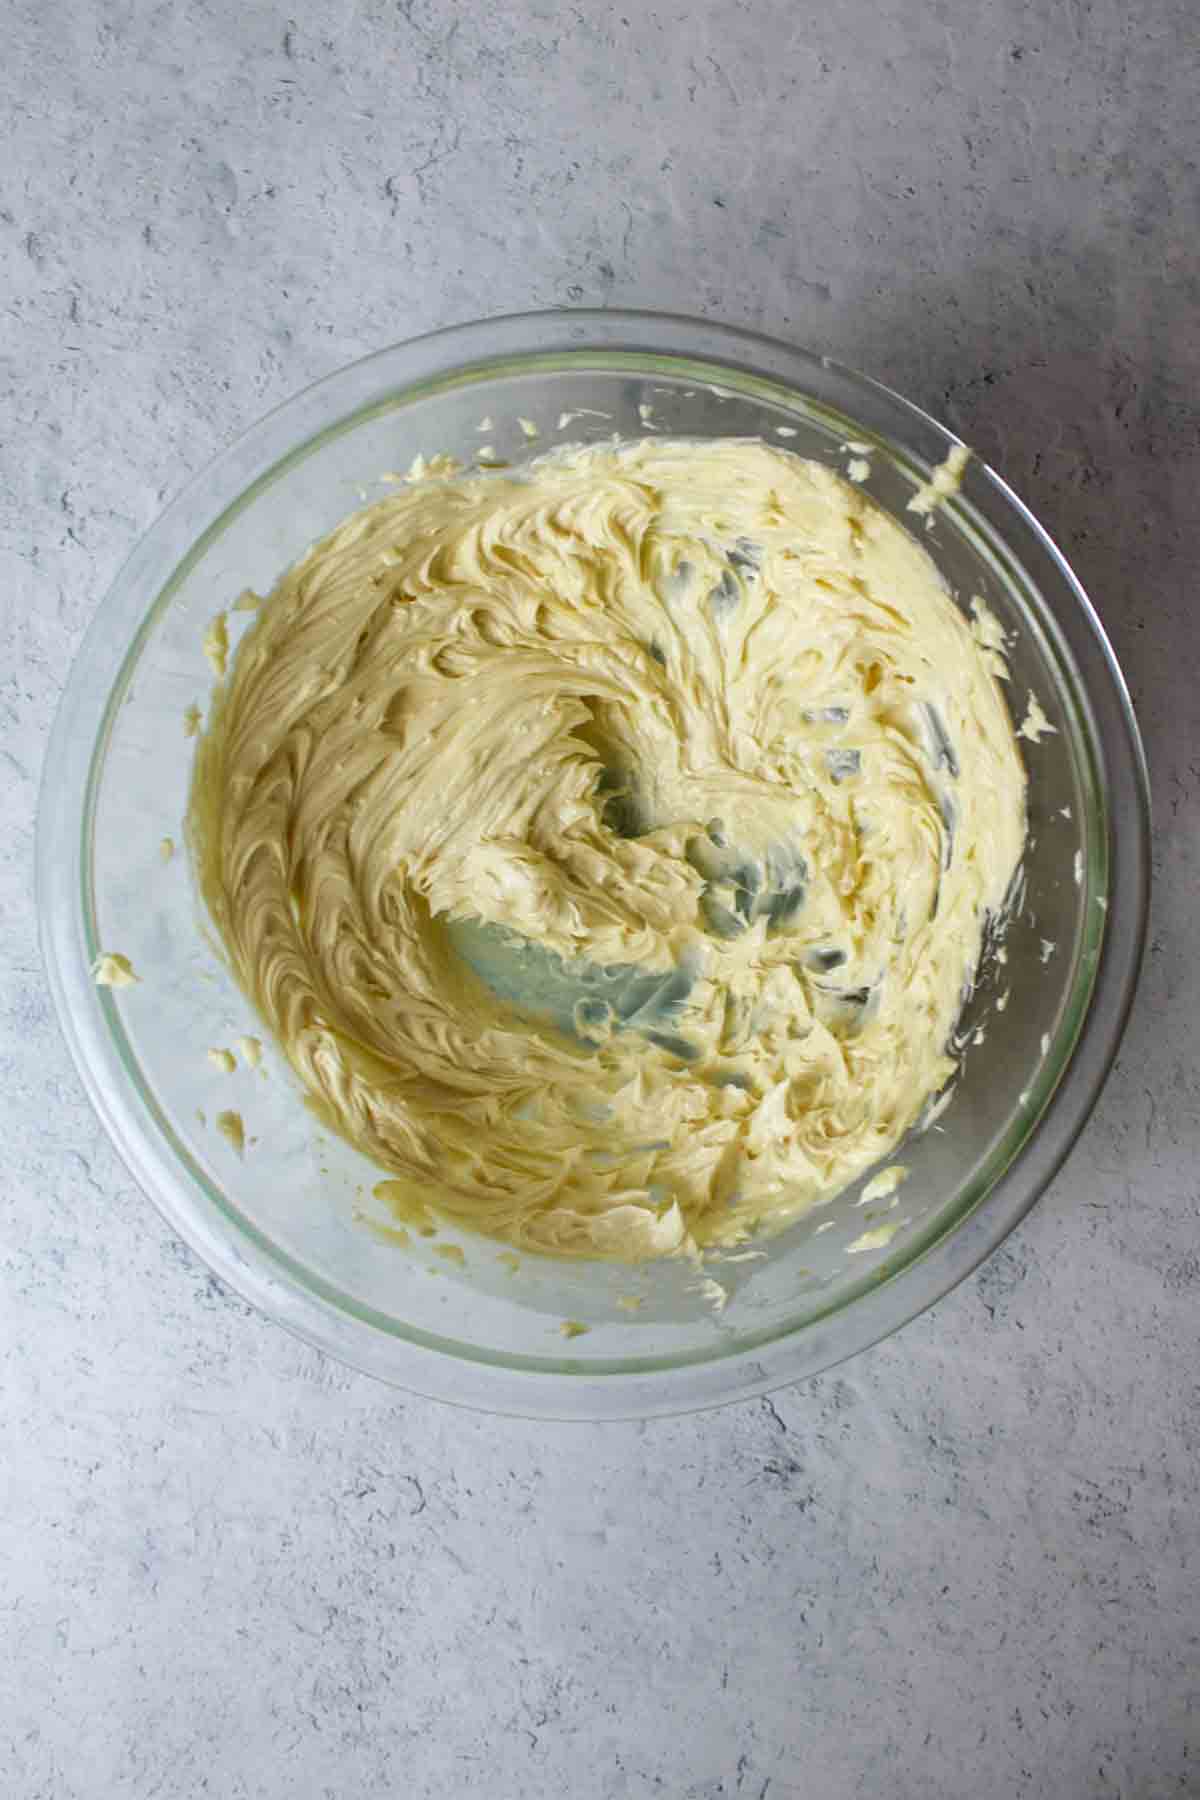 creamed butter in a mixing bowl.